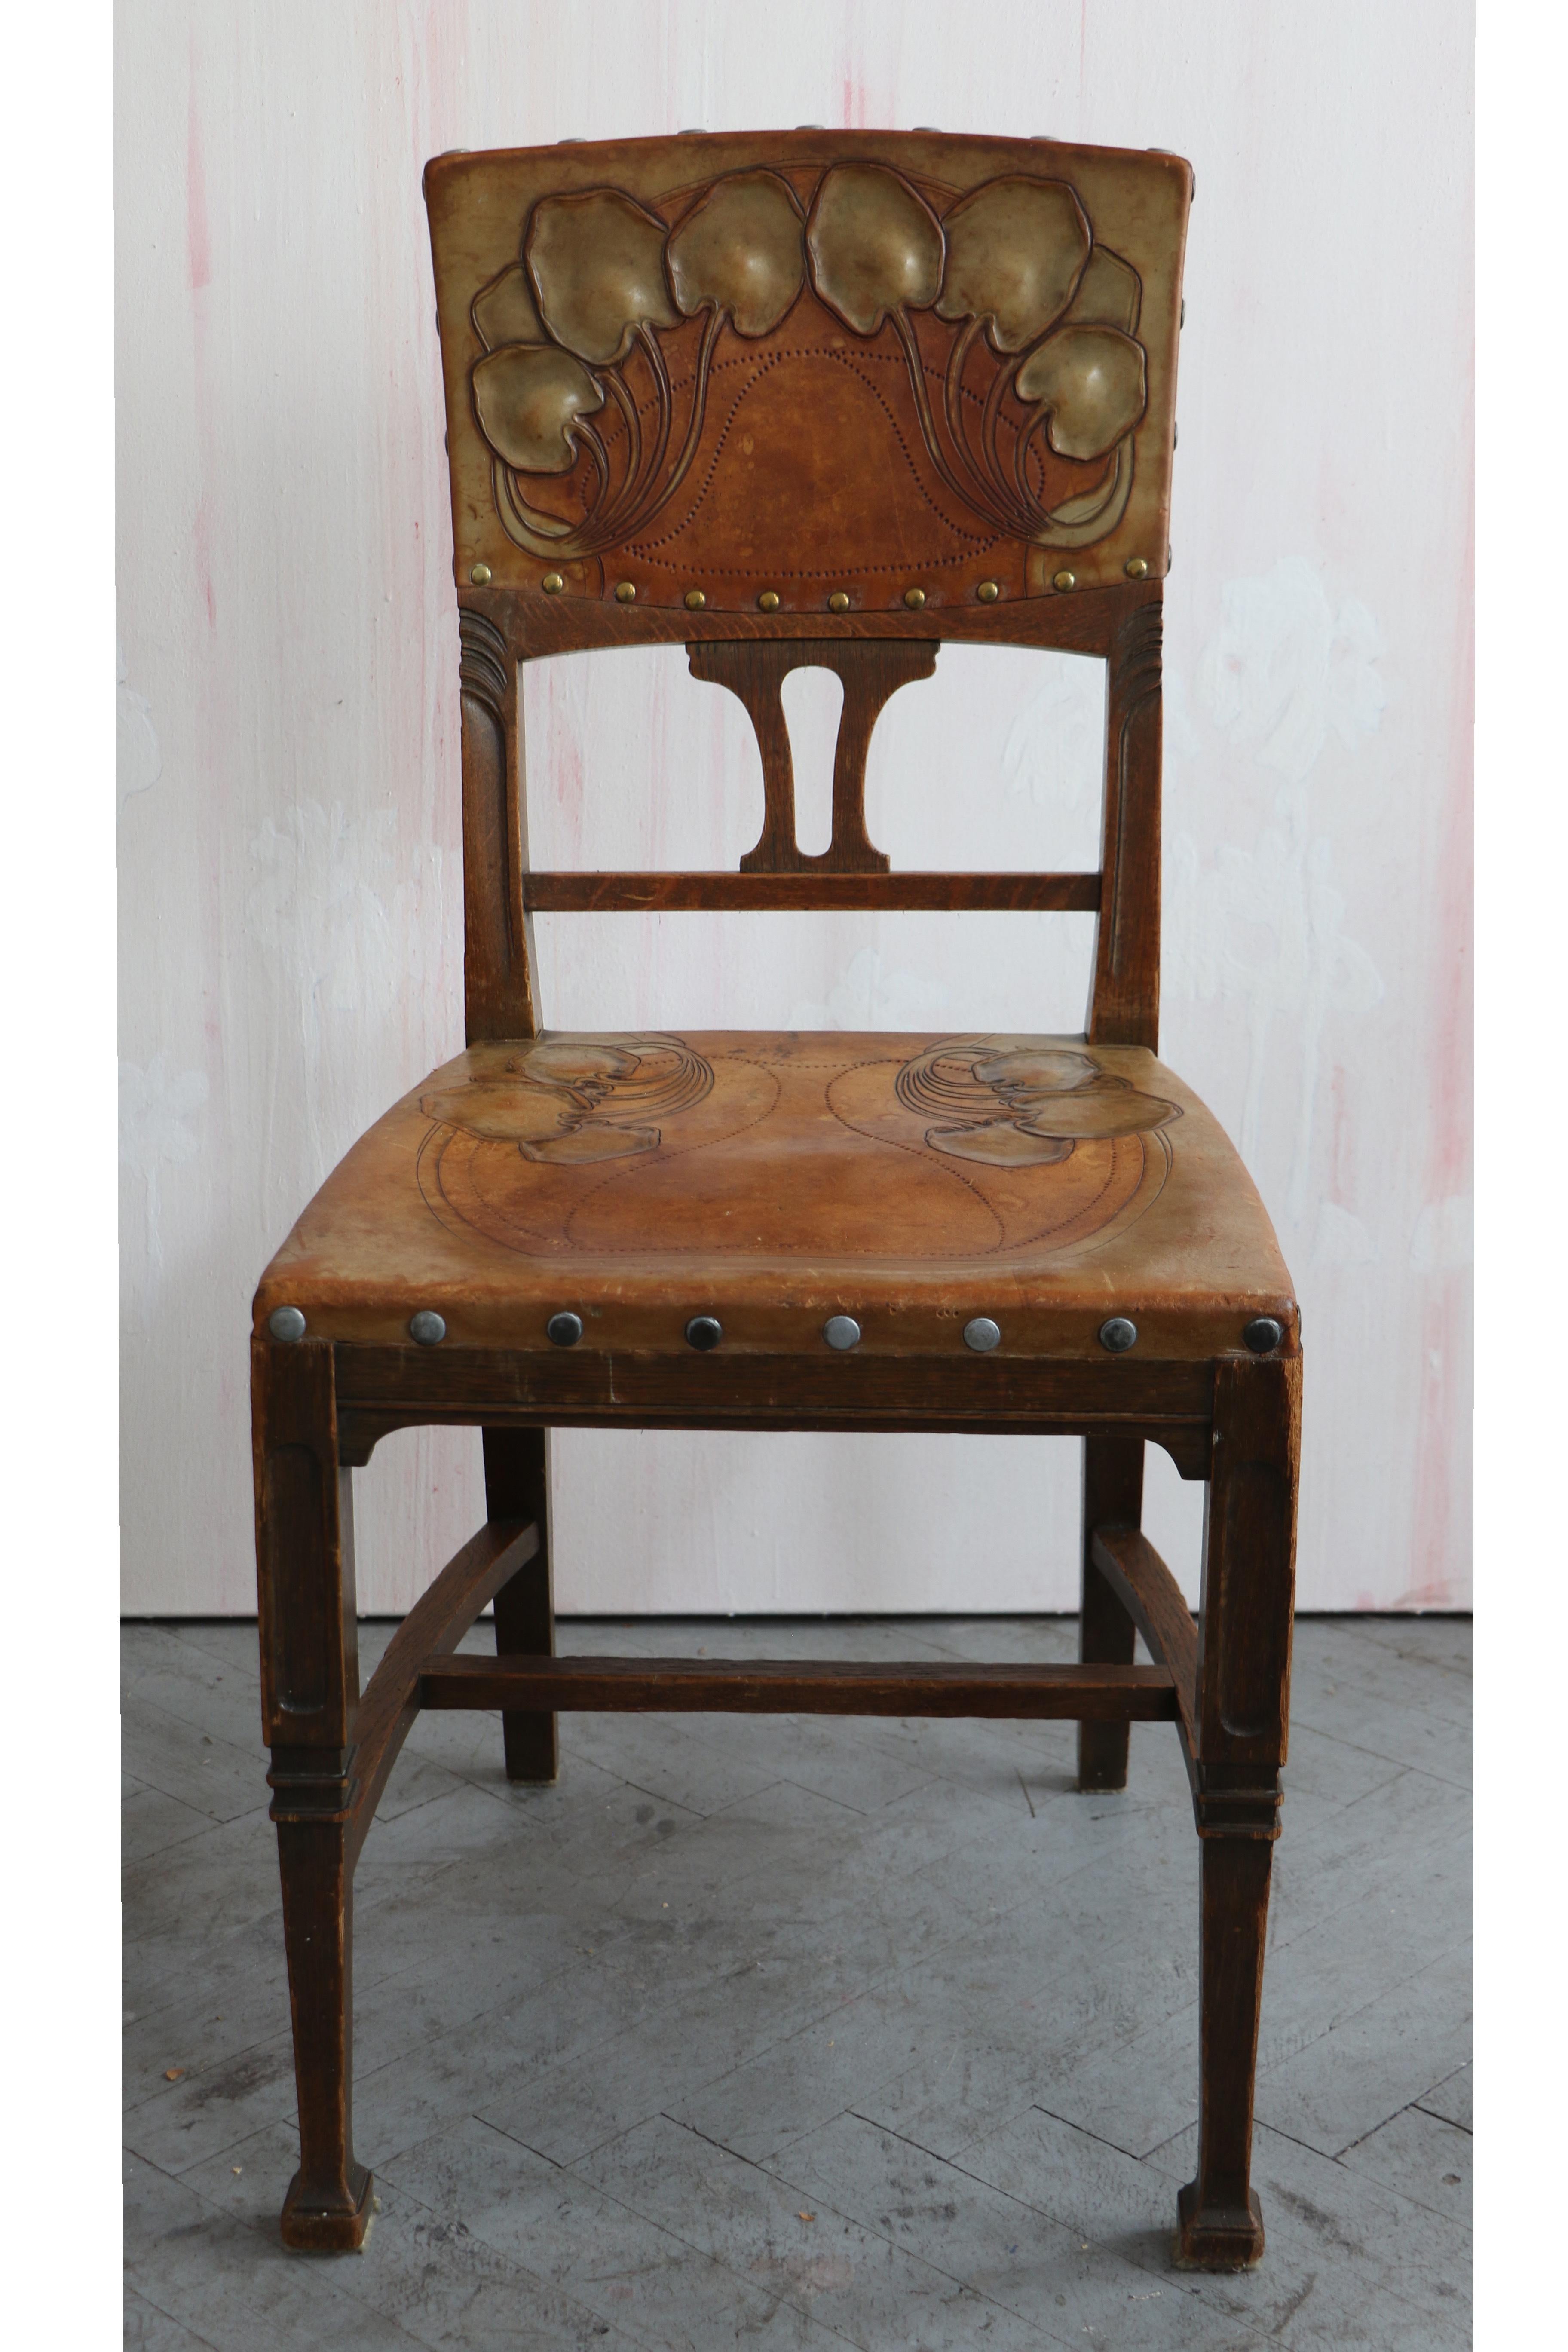 Hello,
These exceptional set of twelve Viennese Art Nouveau solid oak chairs from circa 1910 represent a high level of craftsmanship and elegant design.

Viennese Art Nouveau is a trend in Austrian art, architecture and design at the turn of the